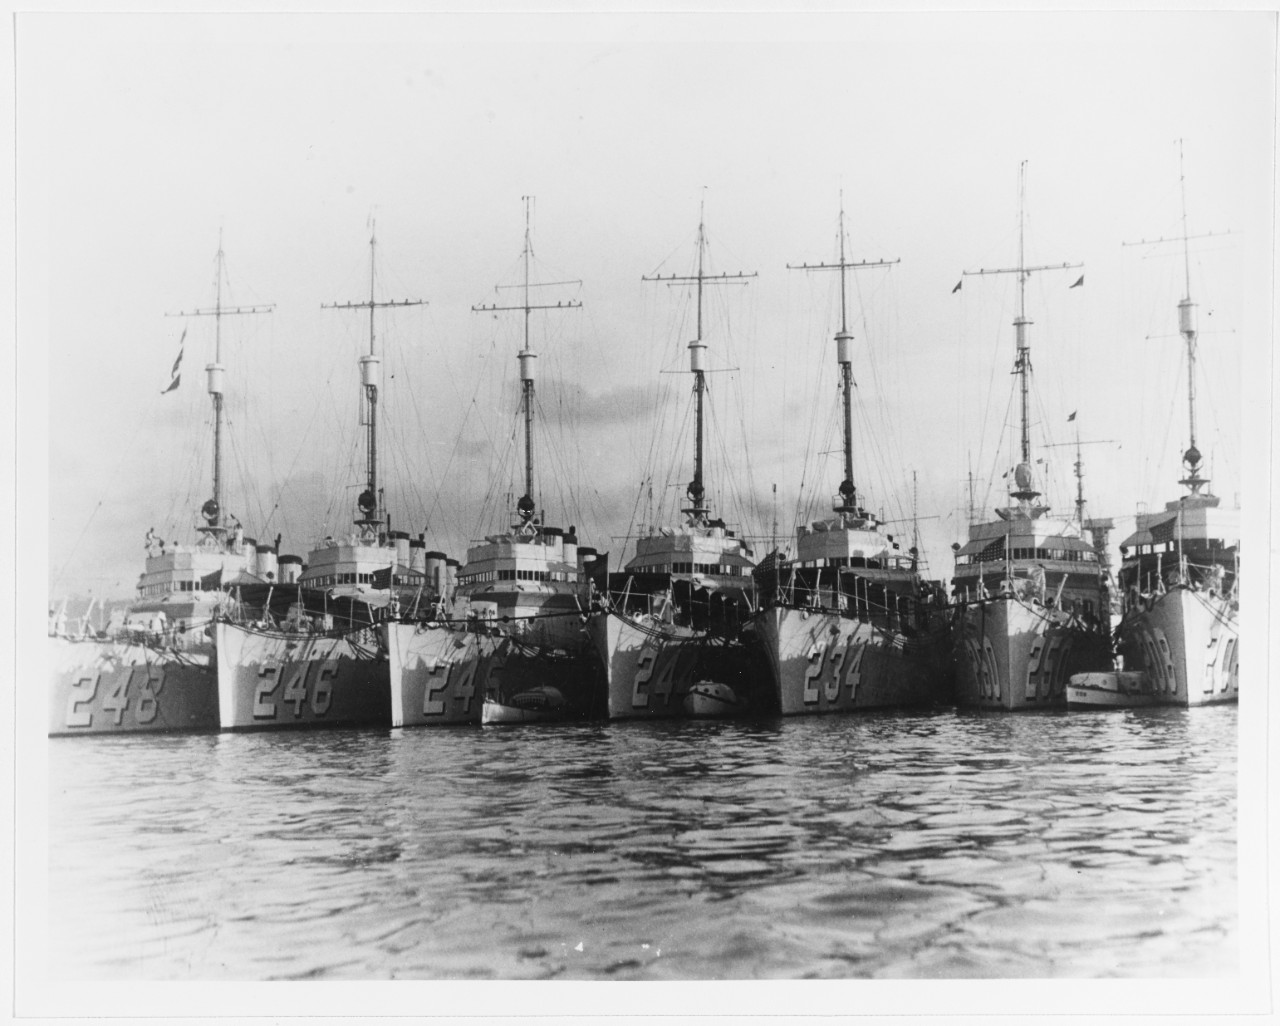 Photo #: NH 91987  Destroyers moored at San Diego, California, prior to World War II